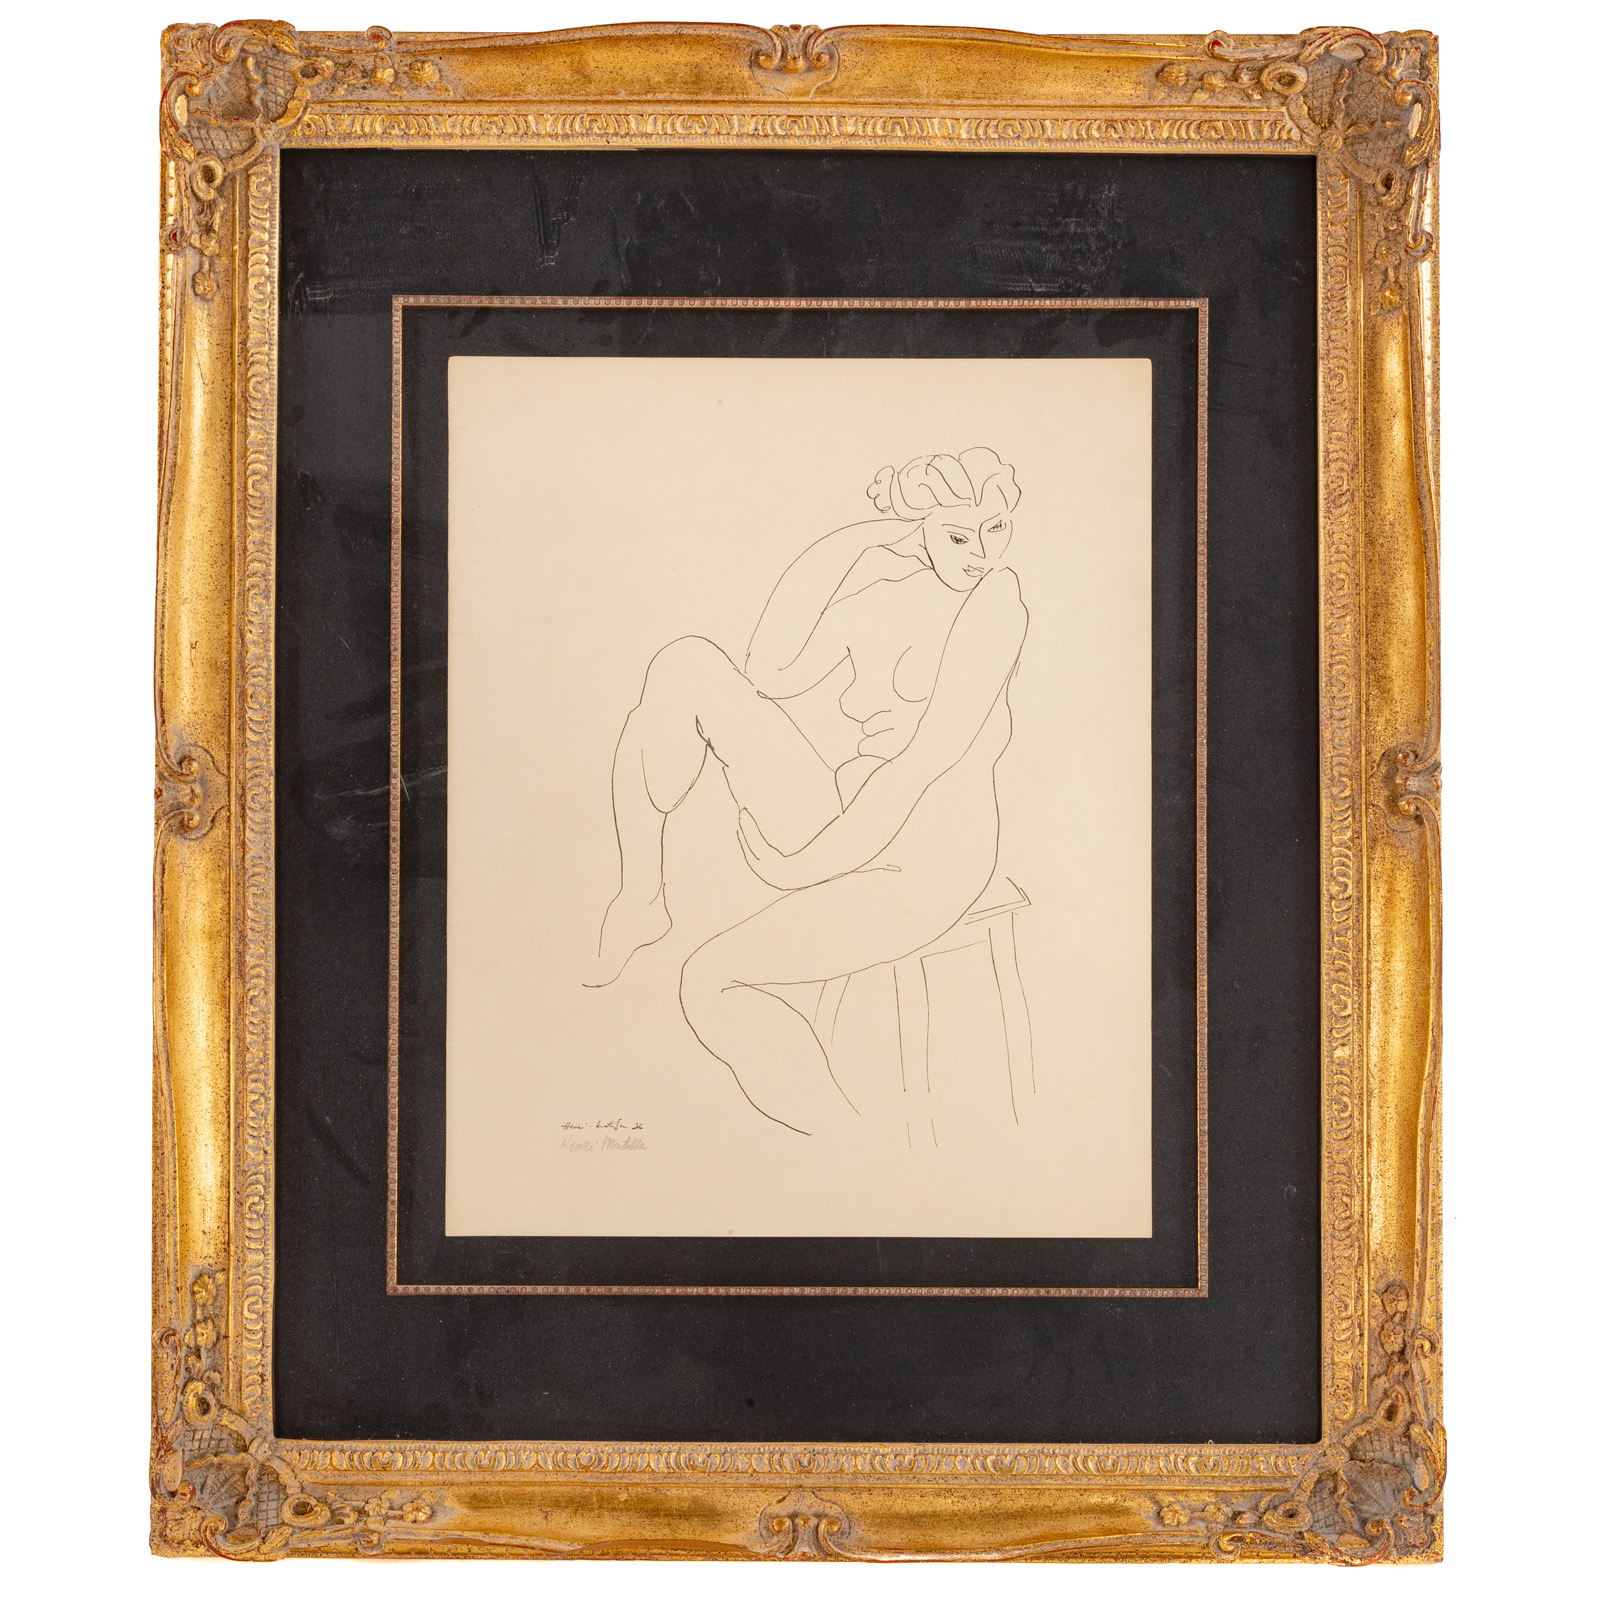 AFTER HENRI MATISSE. SEATED FEMALE